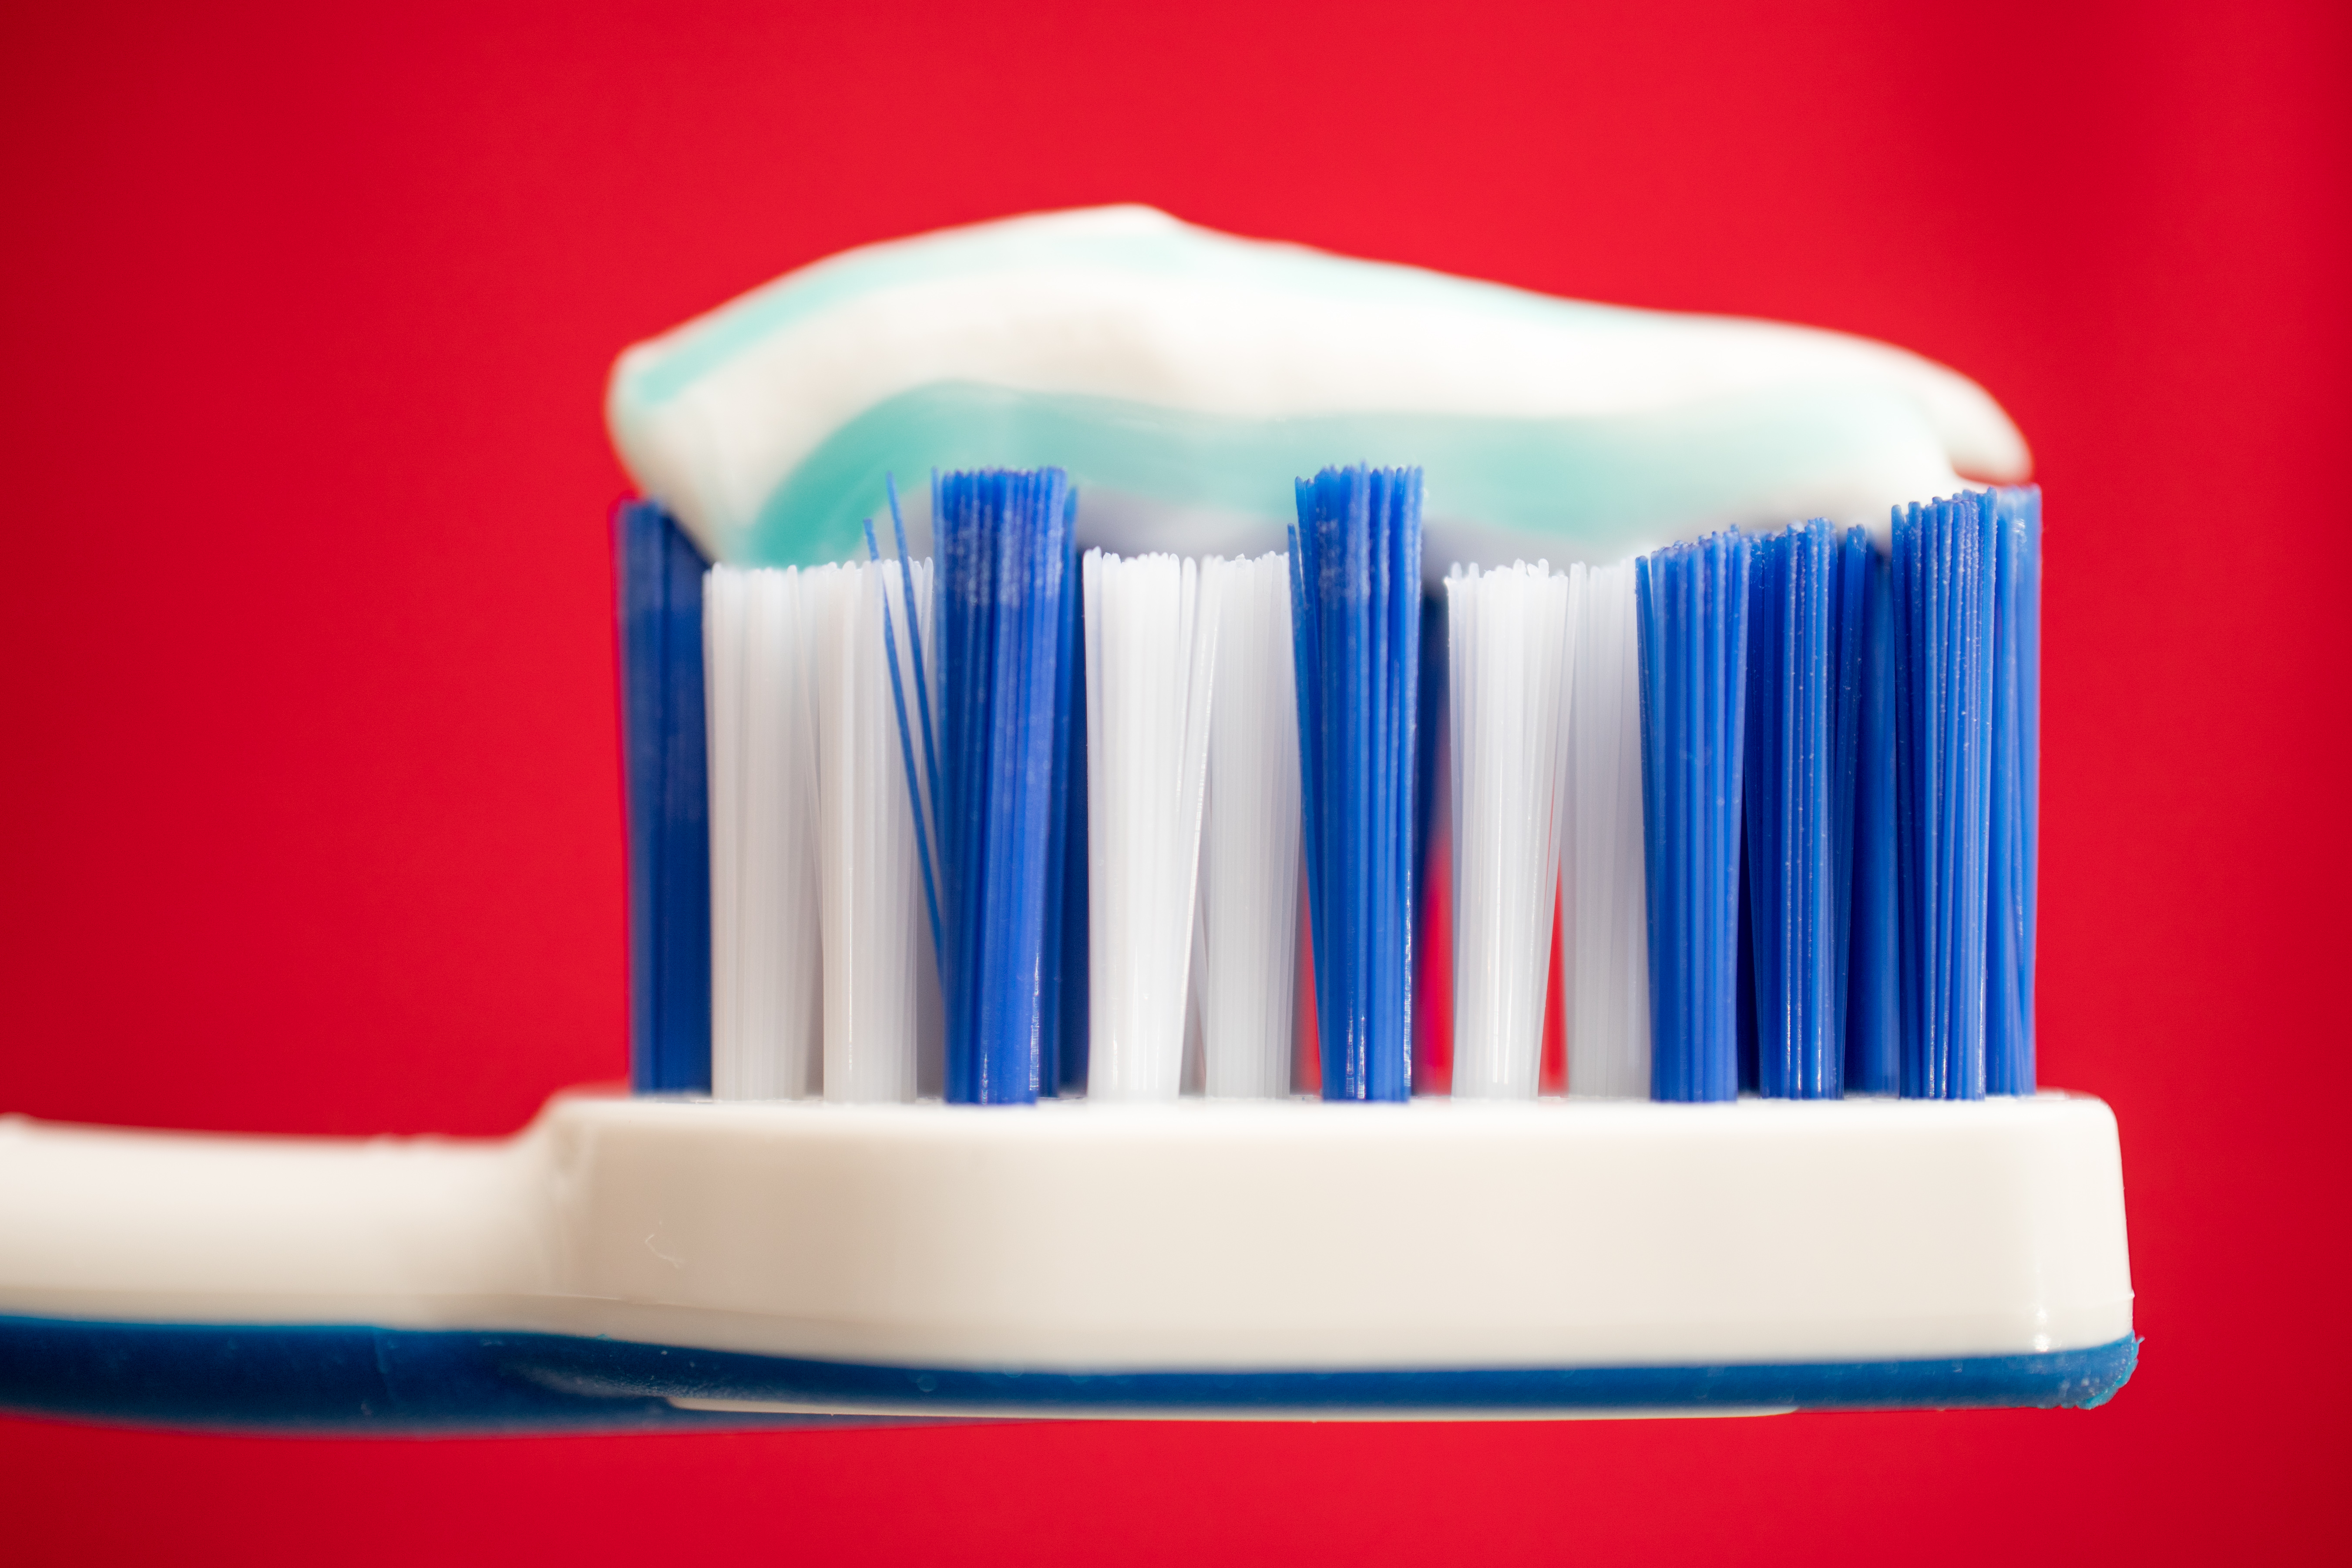 A close-up image of a toothbrush and toothpaste.